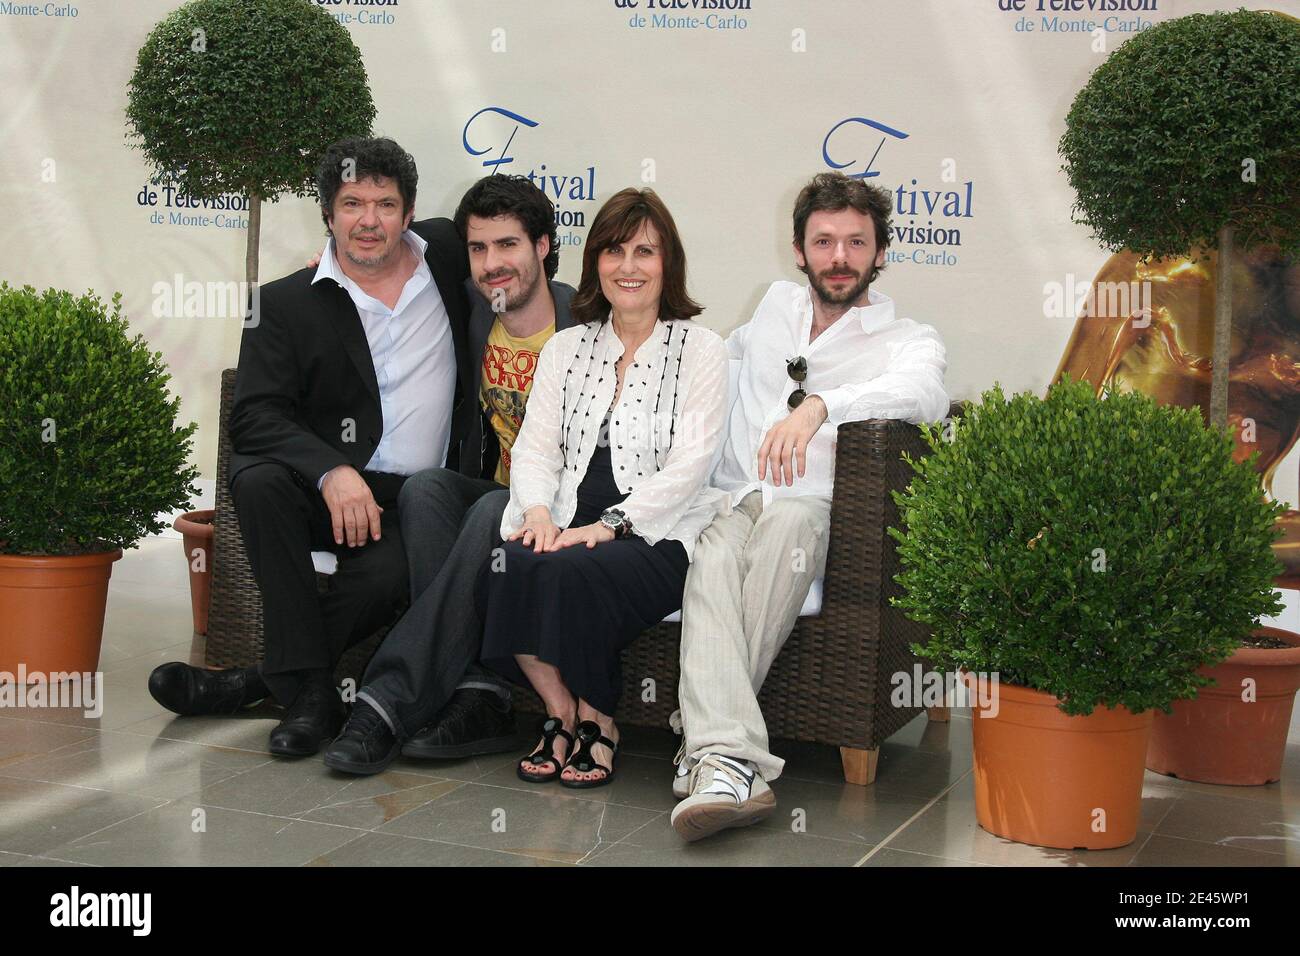 Lionel Astier, Josee Drevon, Simon Astier, Jean-Christophe Hembert and Manu  Meirieu pose for a photocall for 'Kaamelot' during the 49th Monte-Carlo TV  Festival in Monaco on June 8, 2009. Photo by Denis